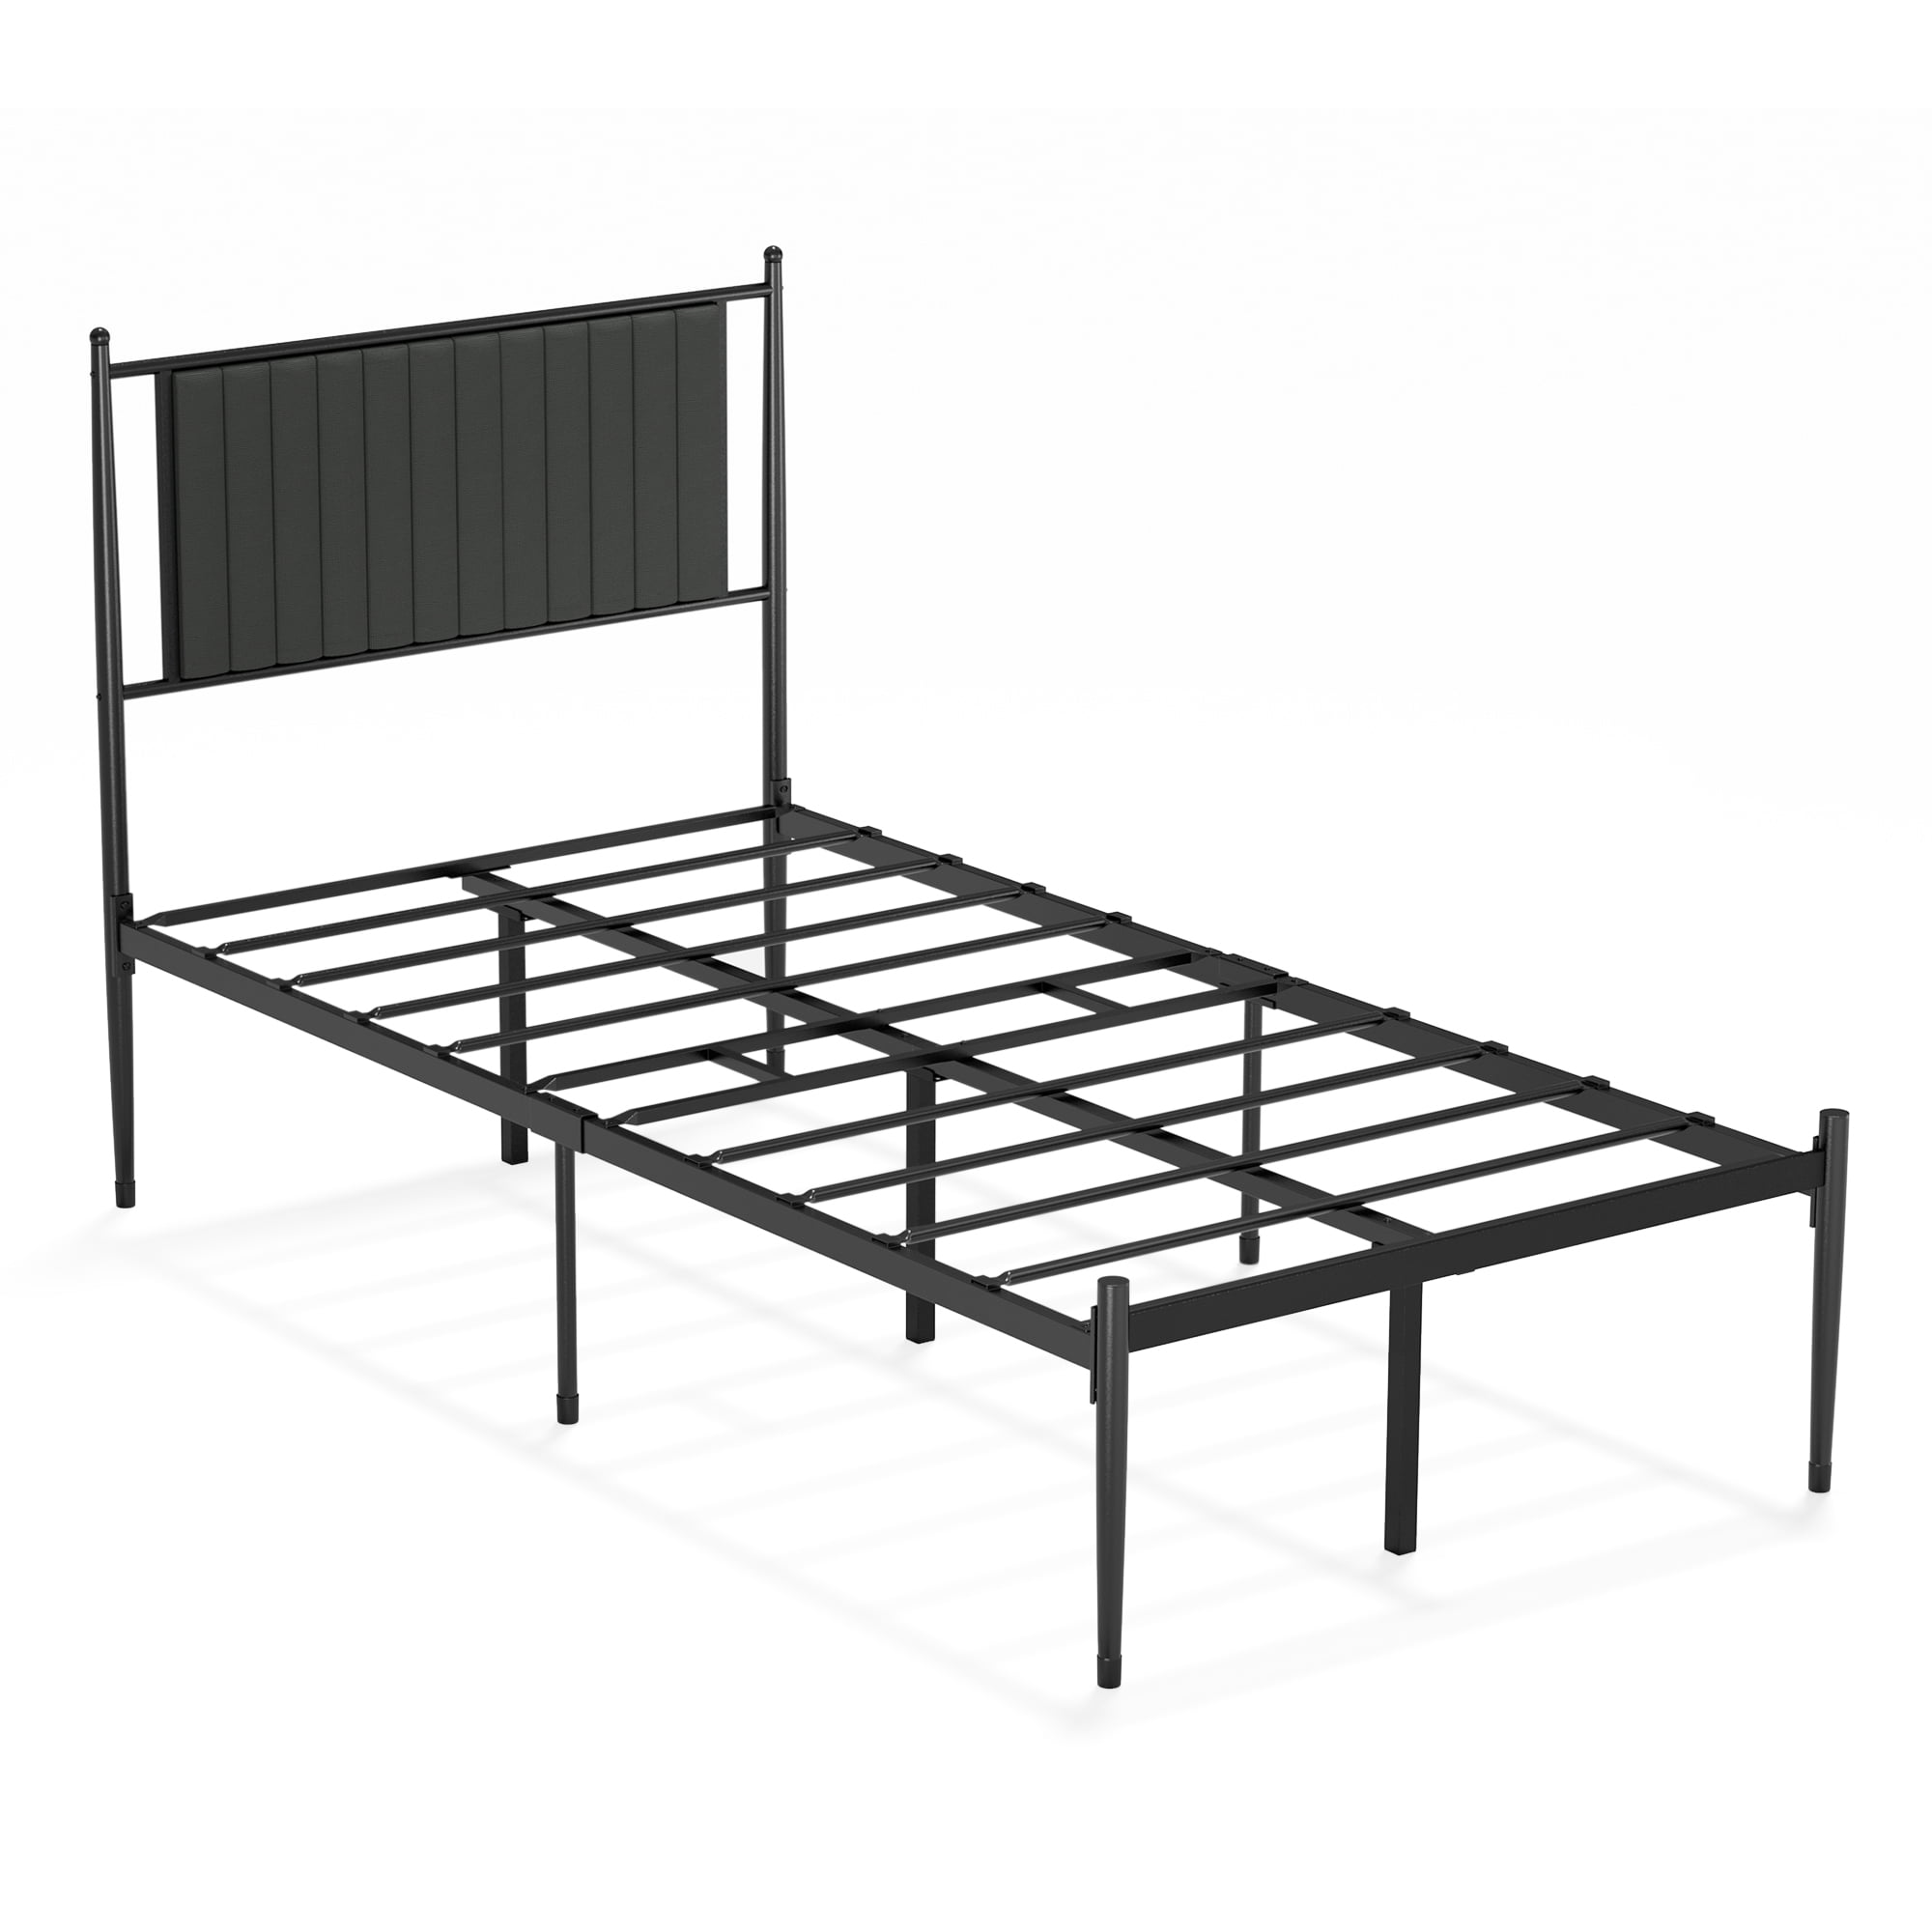 Details about   Brown Vintage Metal Bed Frame Platform with Headboard and Footboard Queen Size 